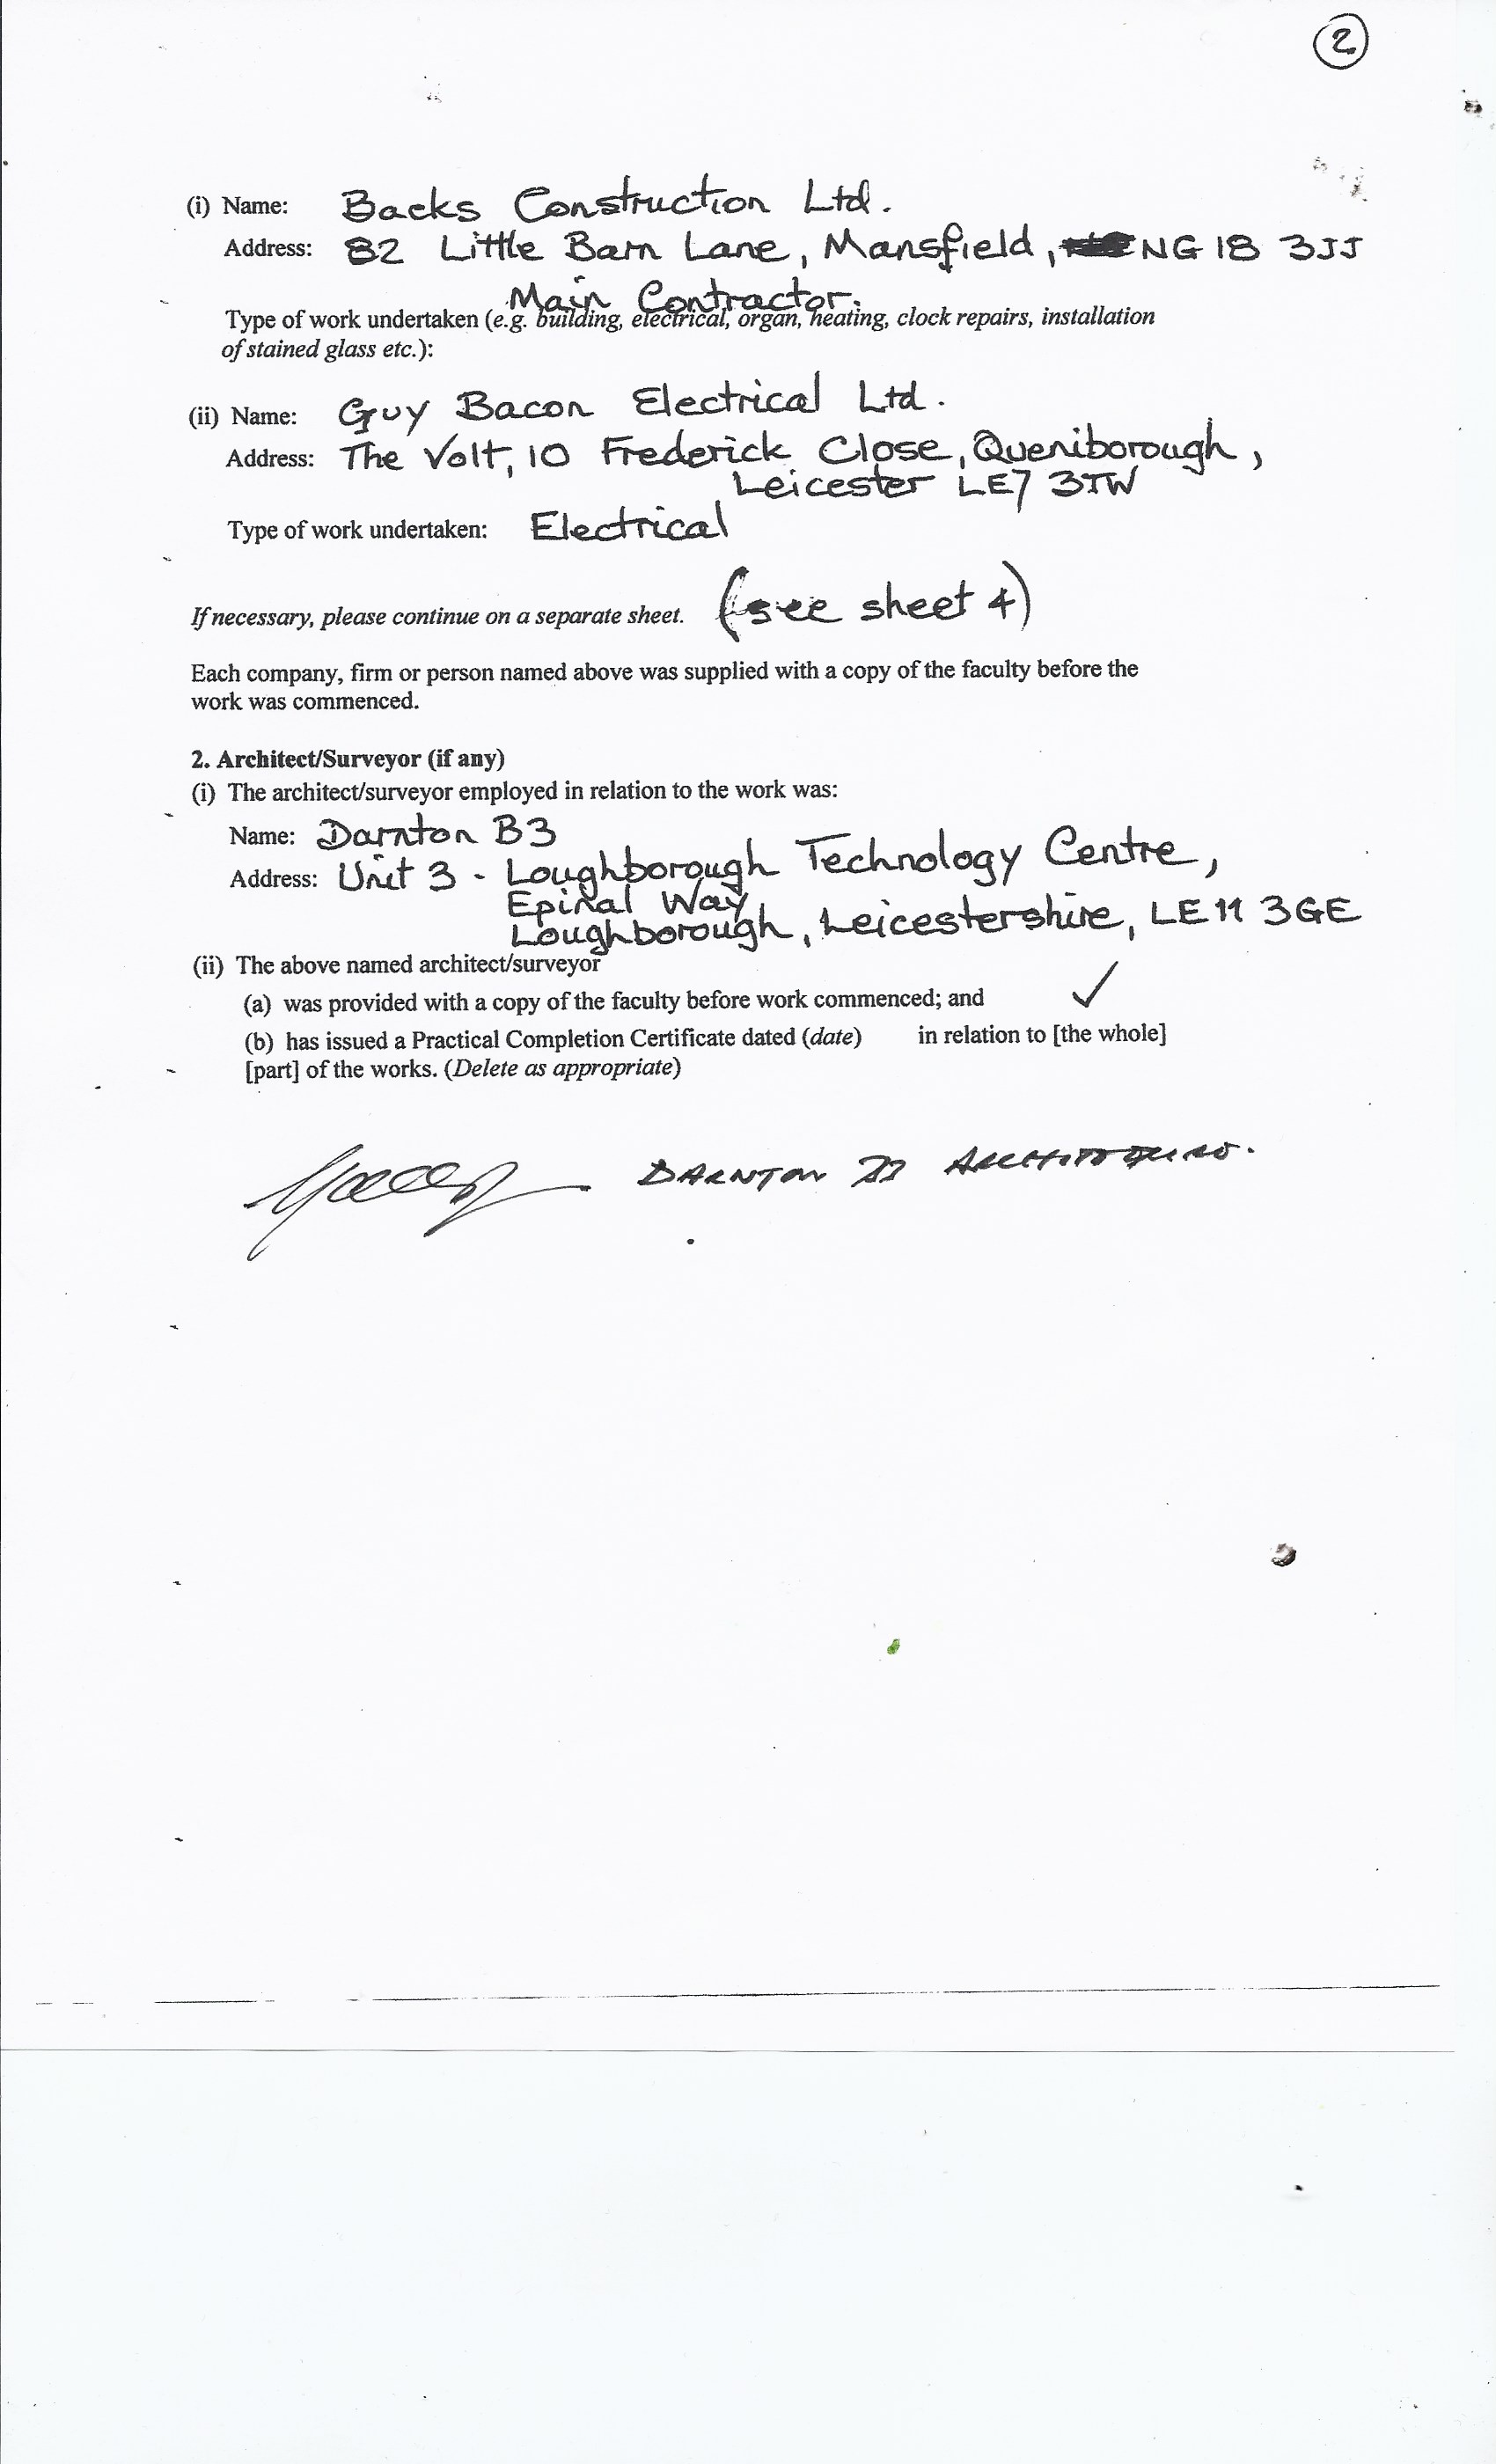 Copy of signed Form 8